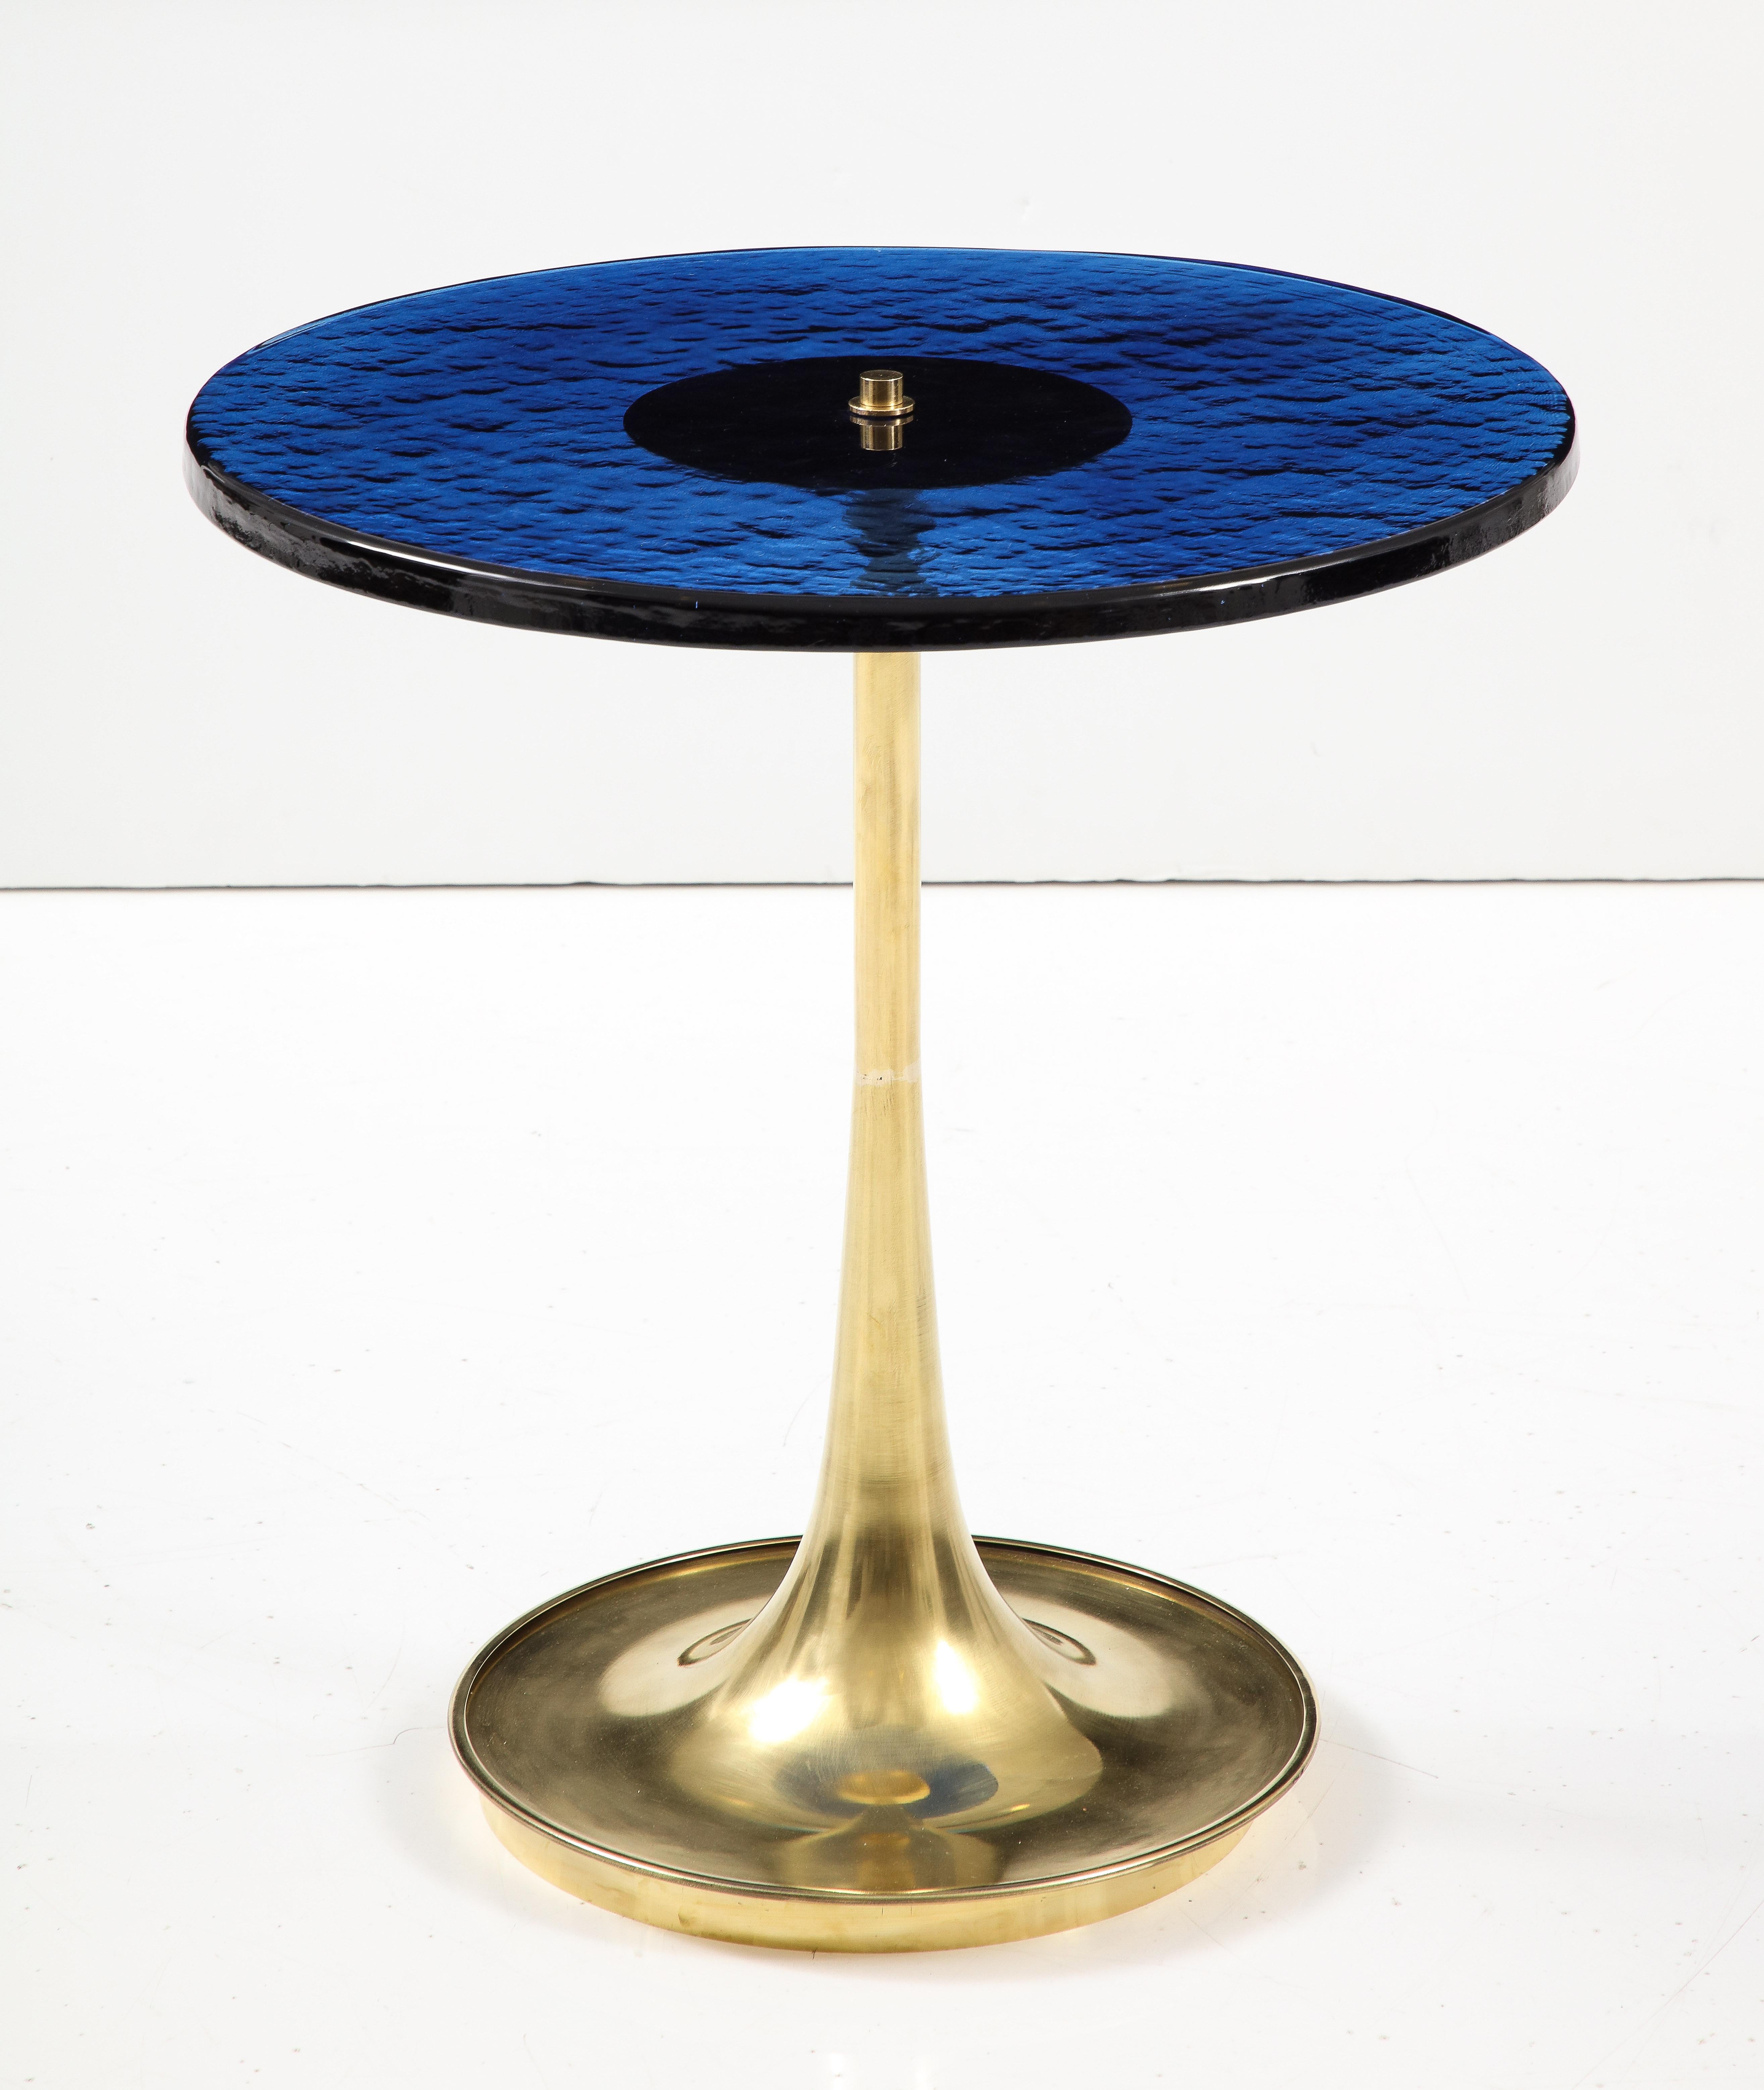 Hand-Crafted Round Cobalt Blue Murano Glass and Brass Martini or Side Table, Italy